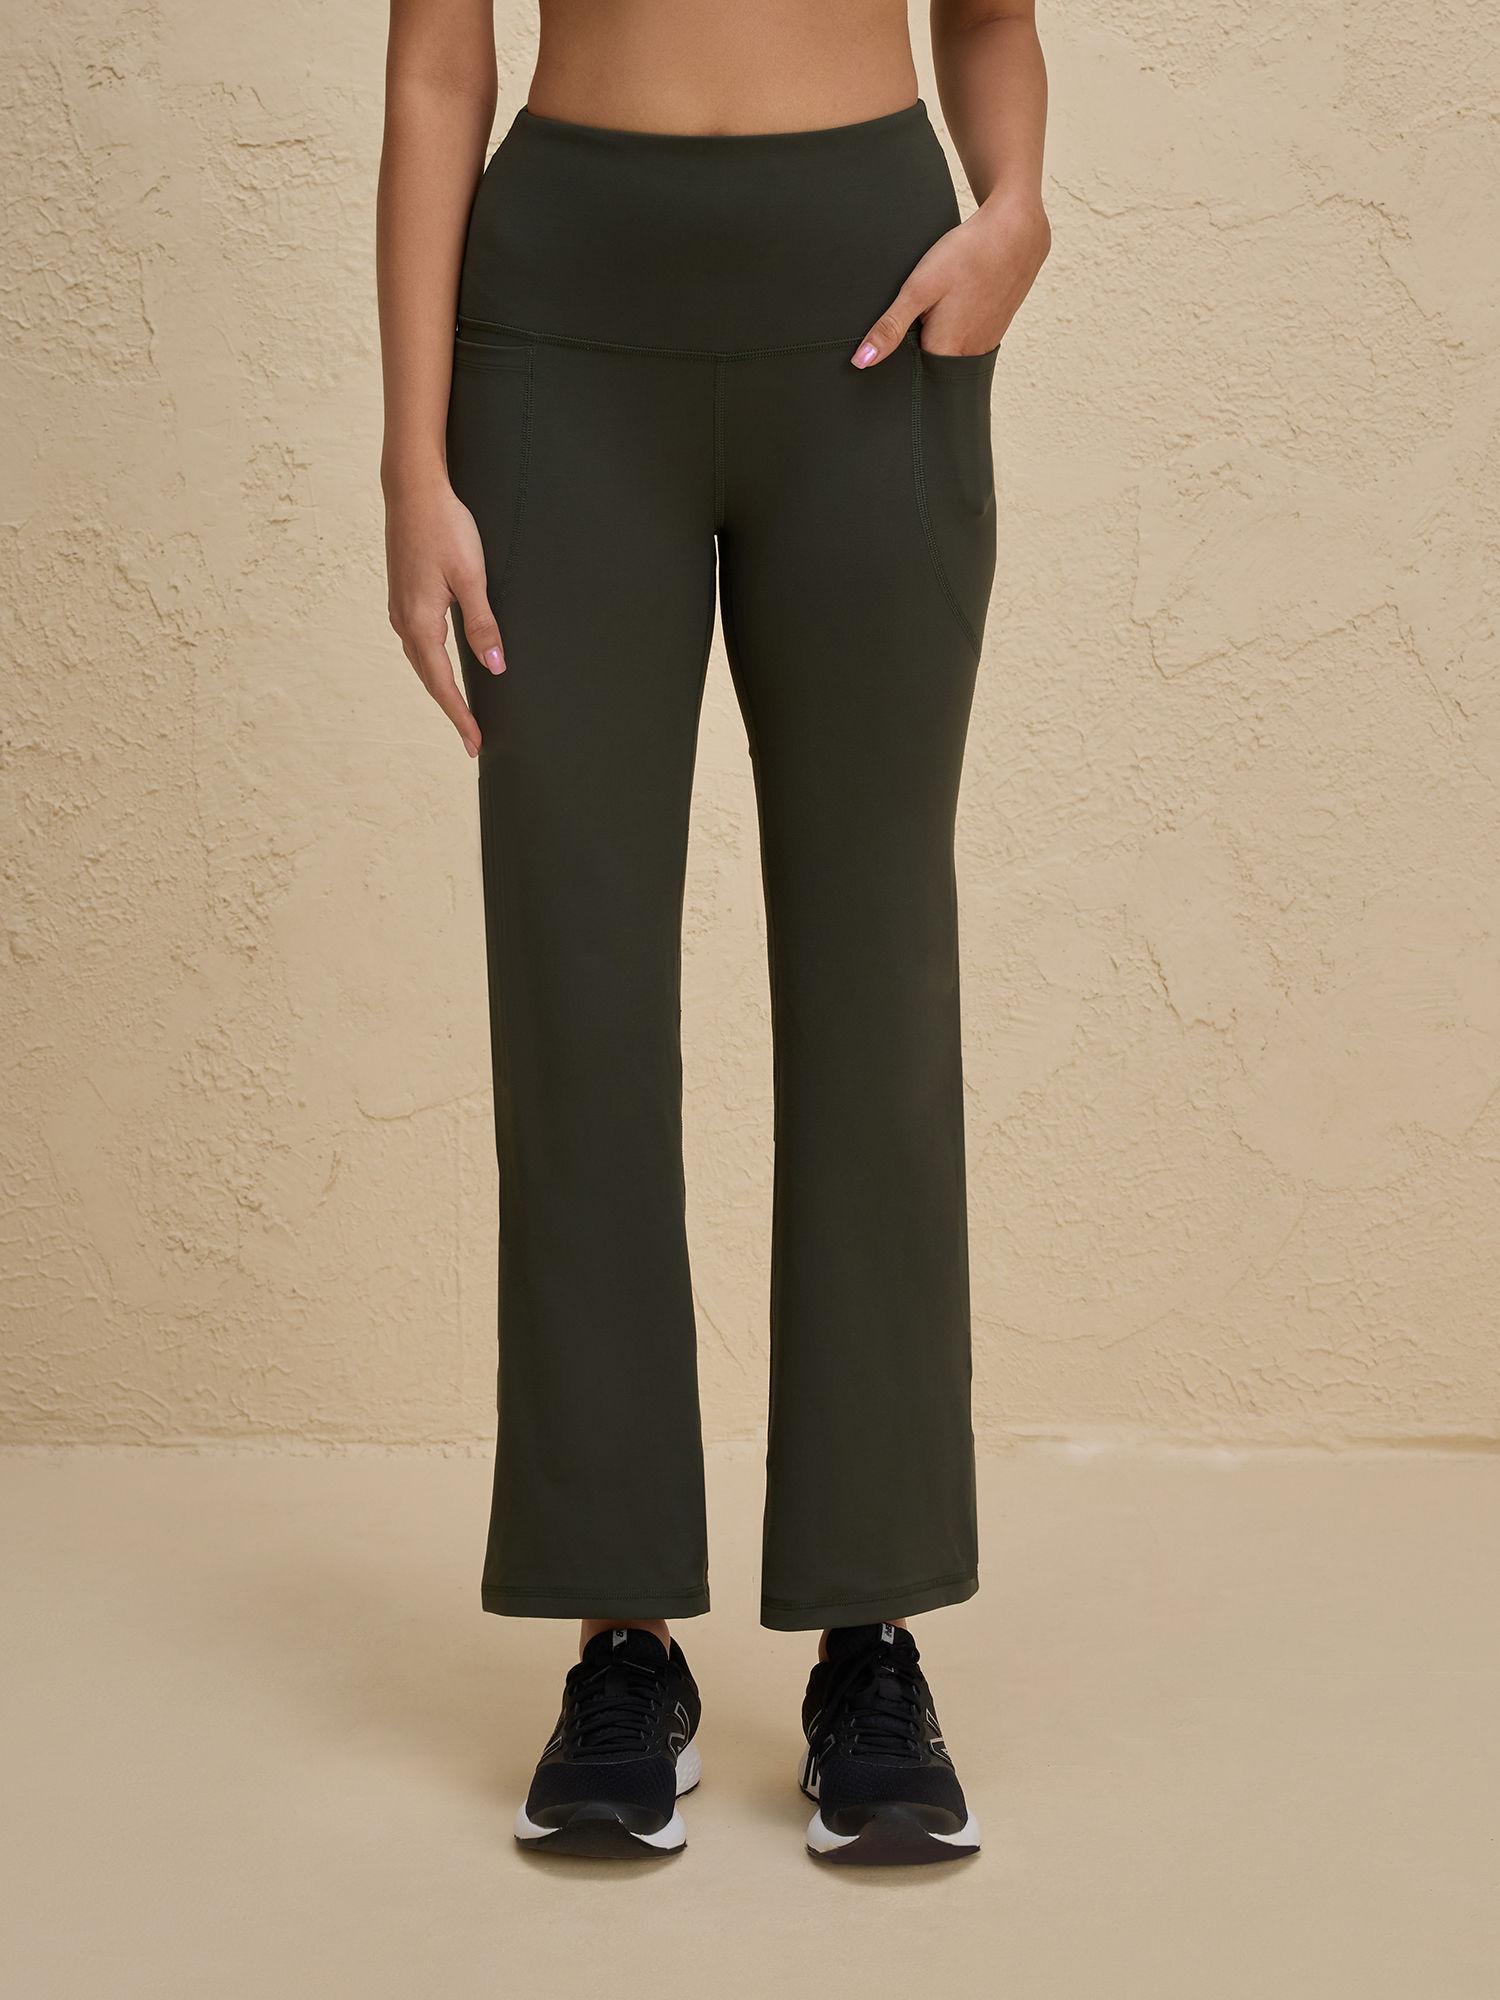 cloud soft super comfy & flattering flare pants with pockets-nyk252-olive